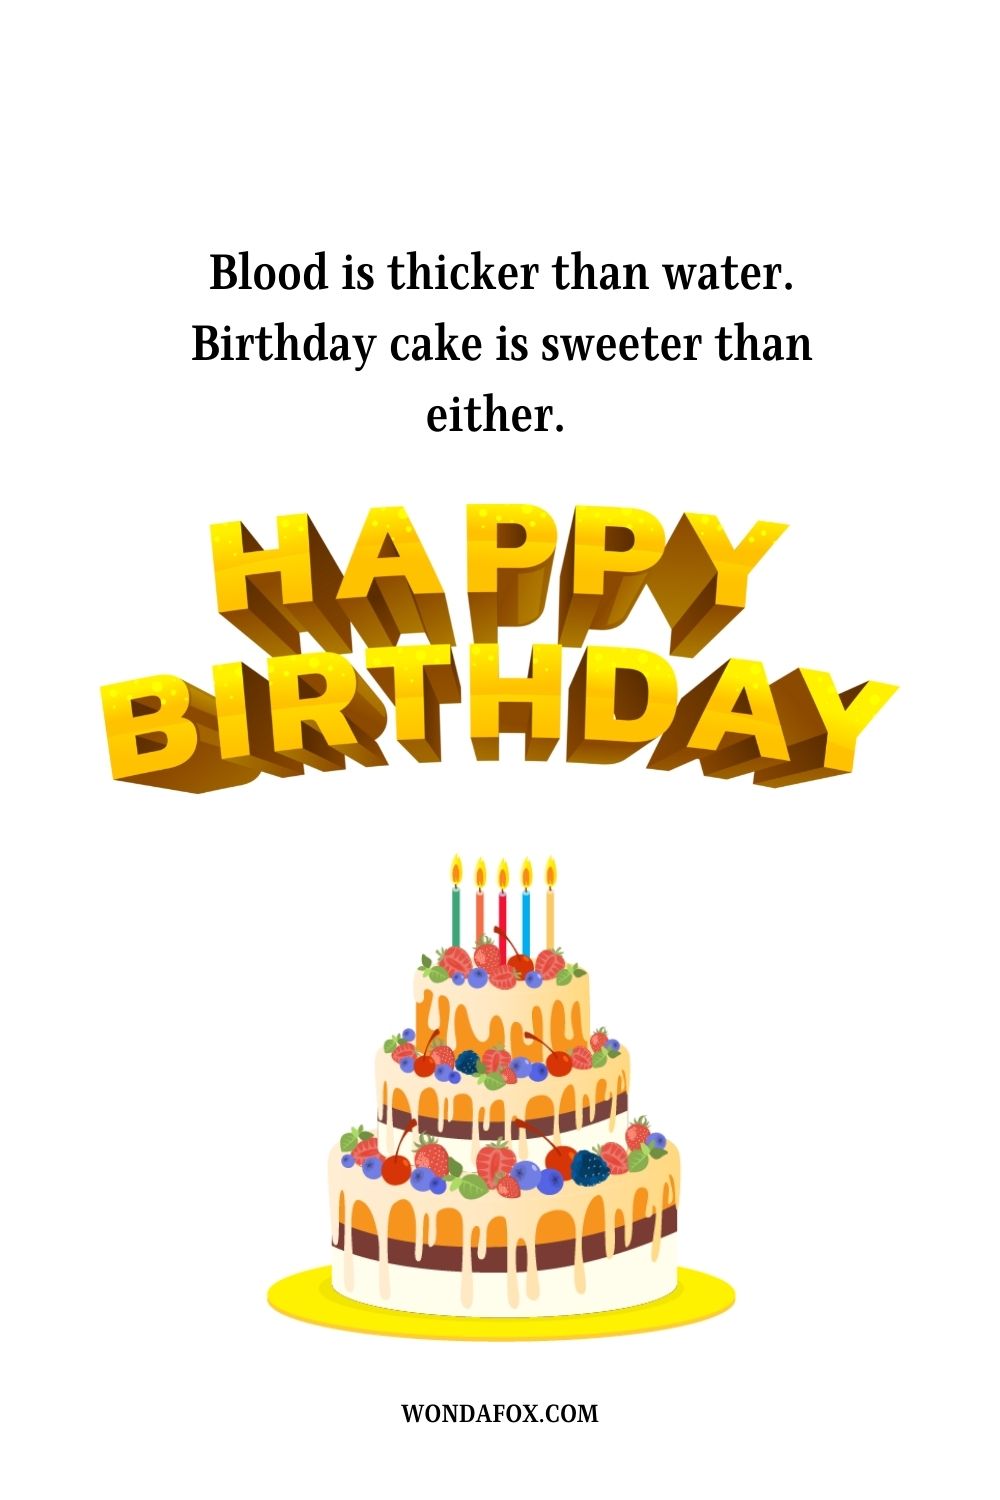 Blood is thicker than water. Birthday cake is sweeter than either. Happy birthday!